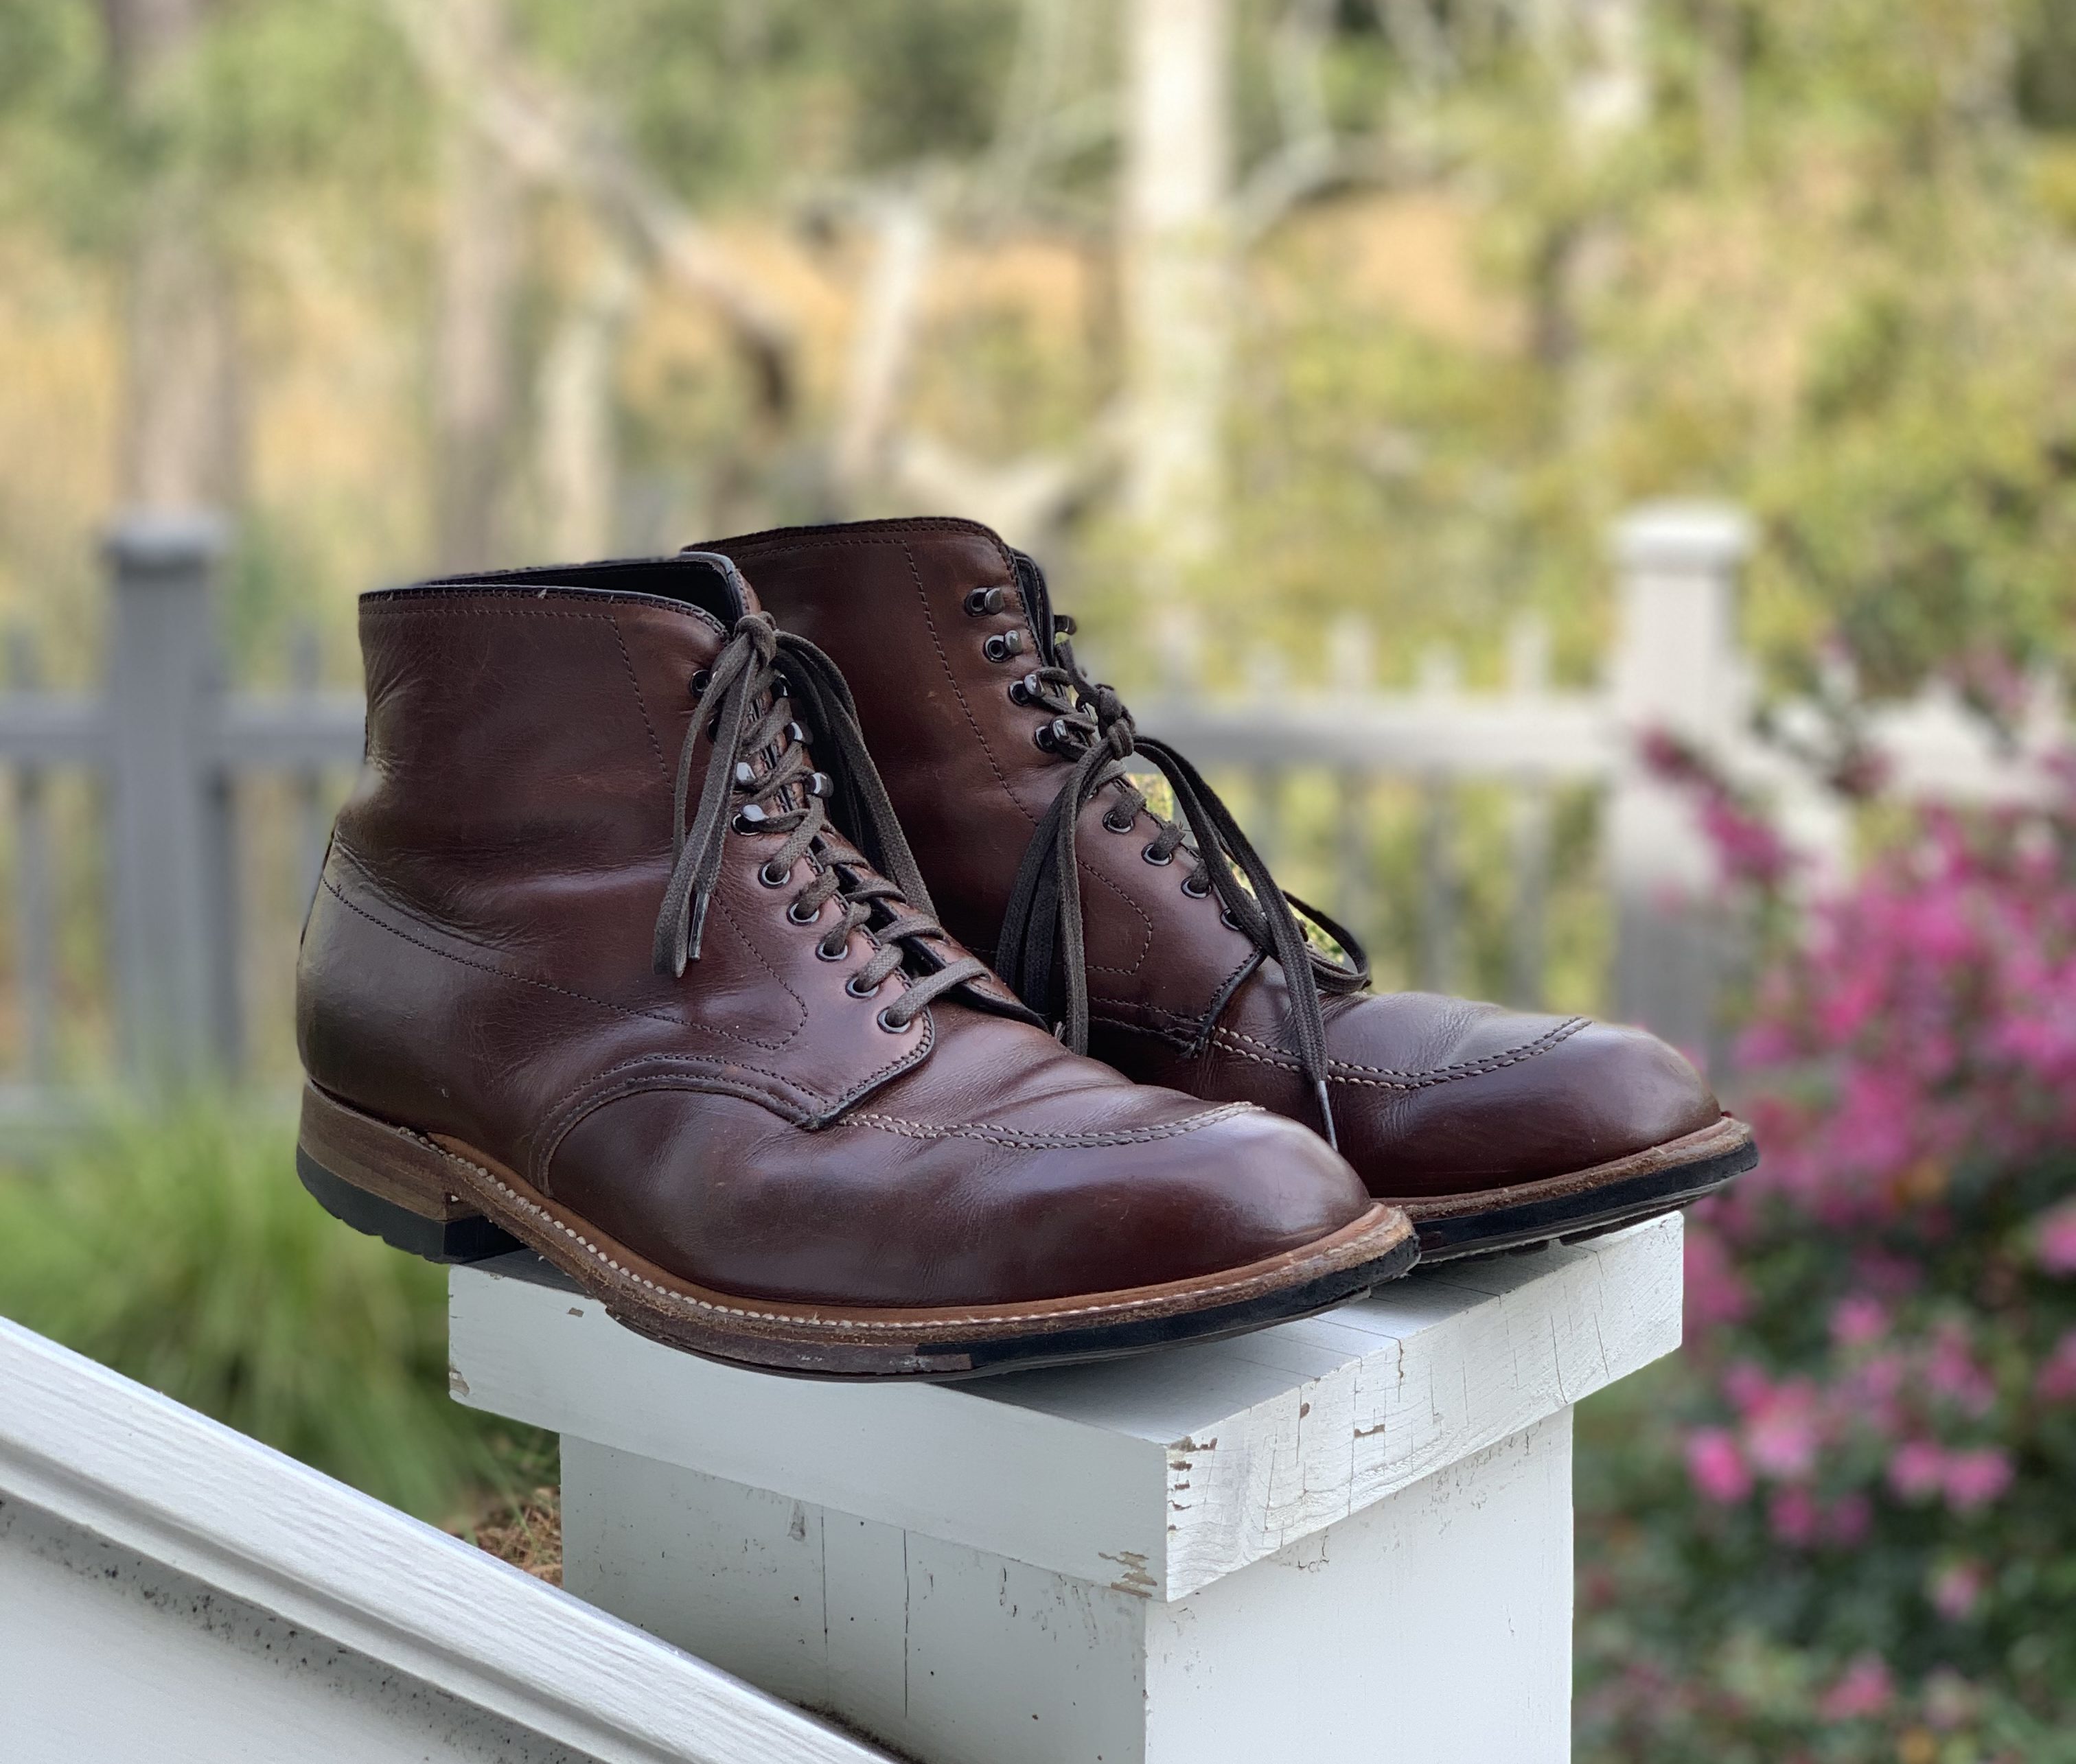 Alden Indy Boots Review—Three Years 